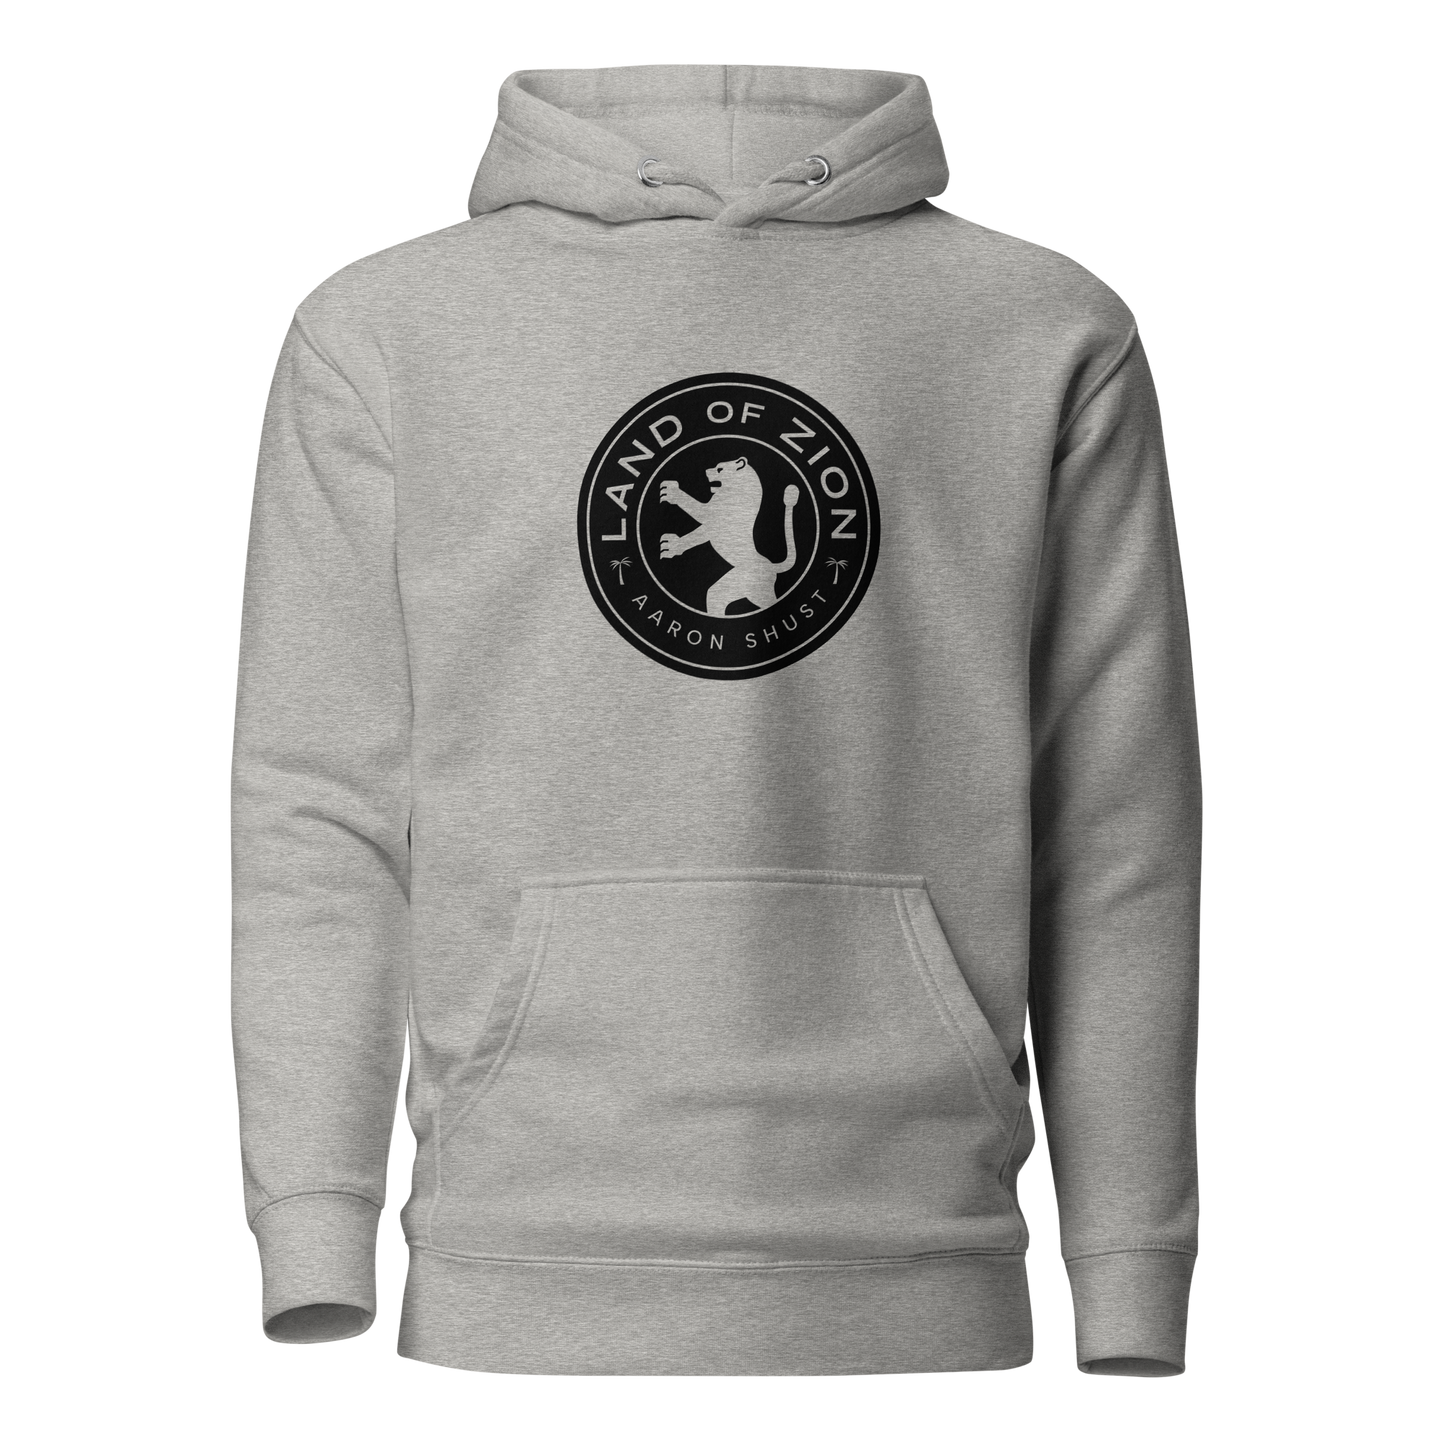 Land of Zion Hoodie